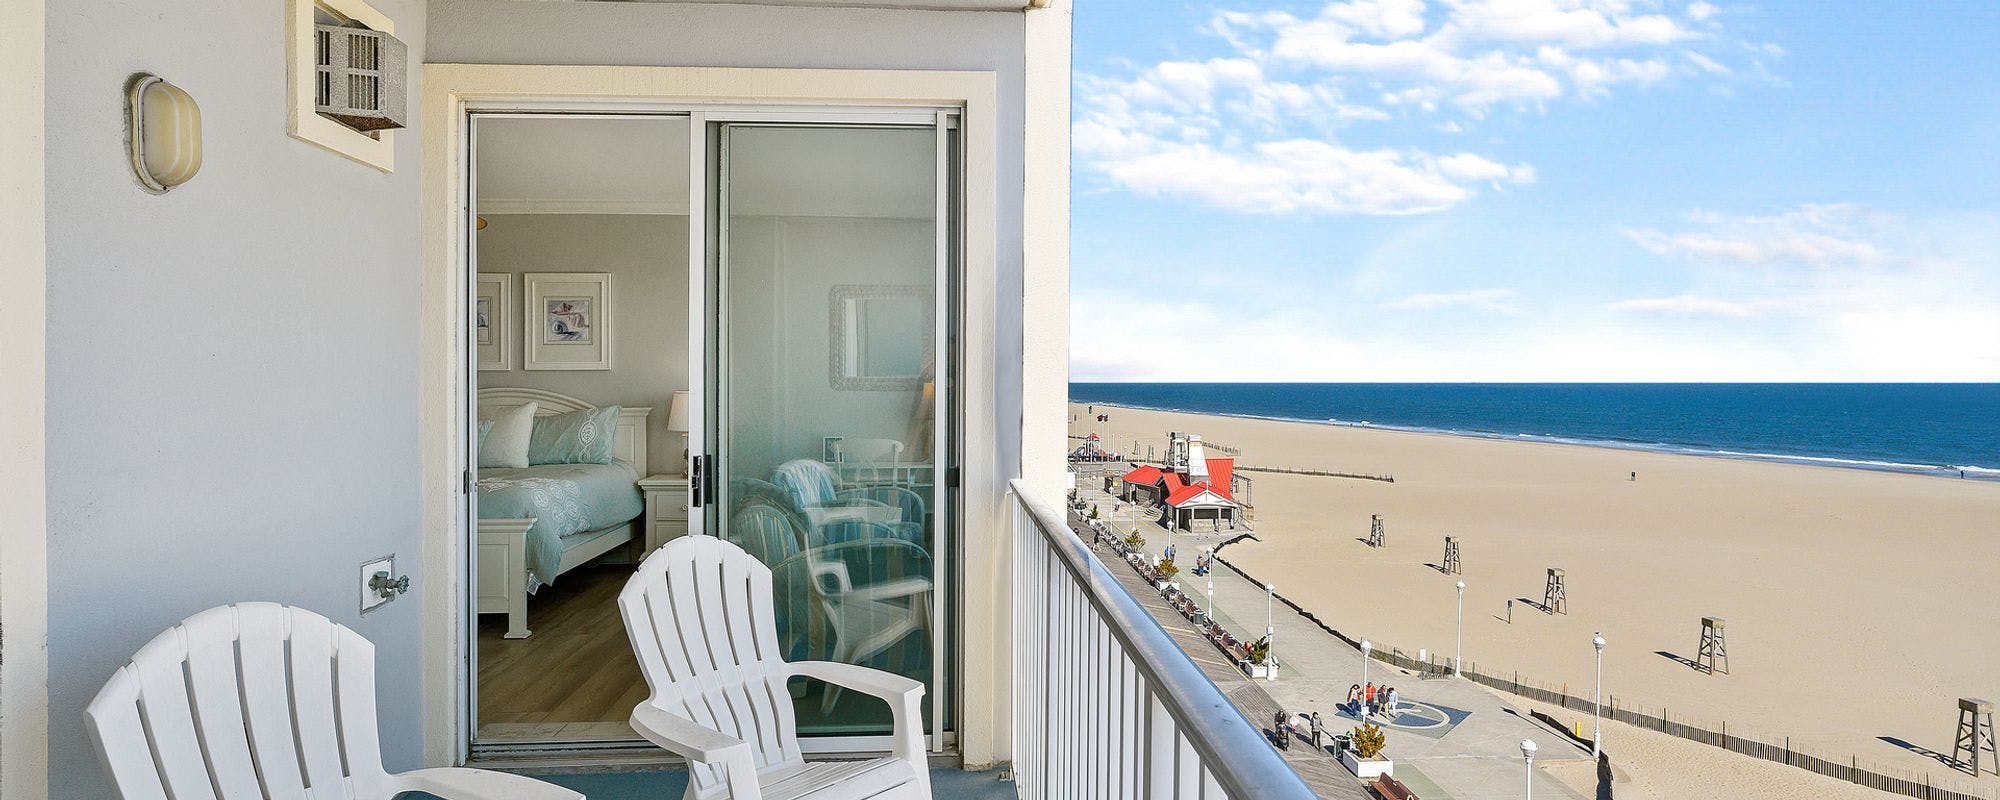 Oceanfront balcony views from Ocean City vacation rental